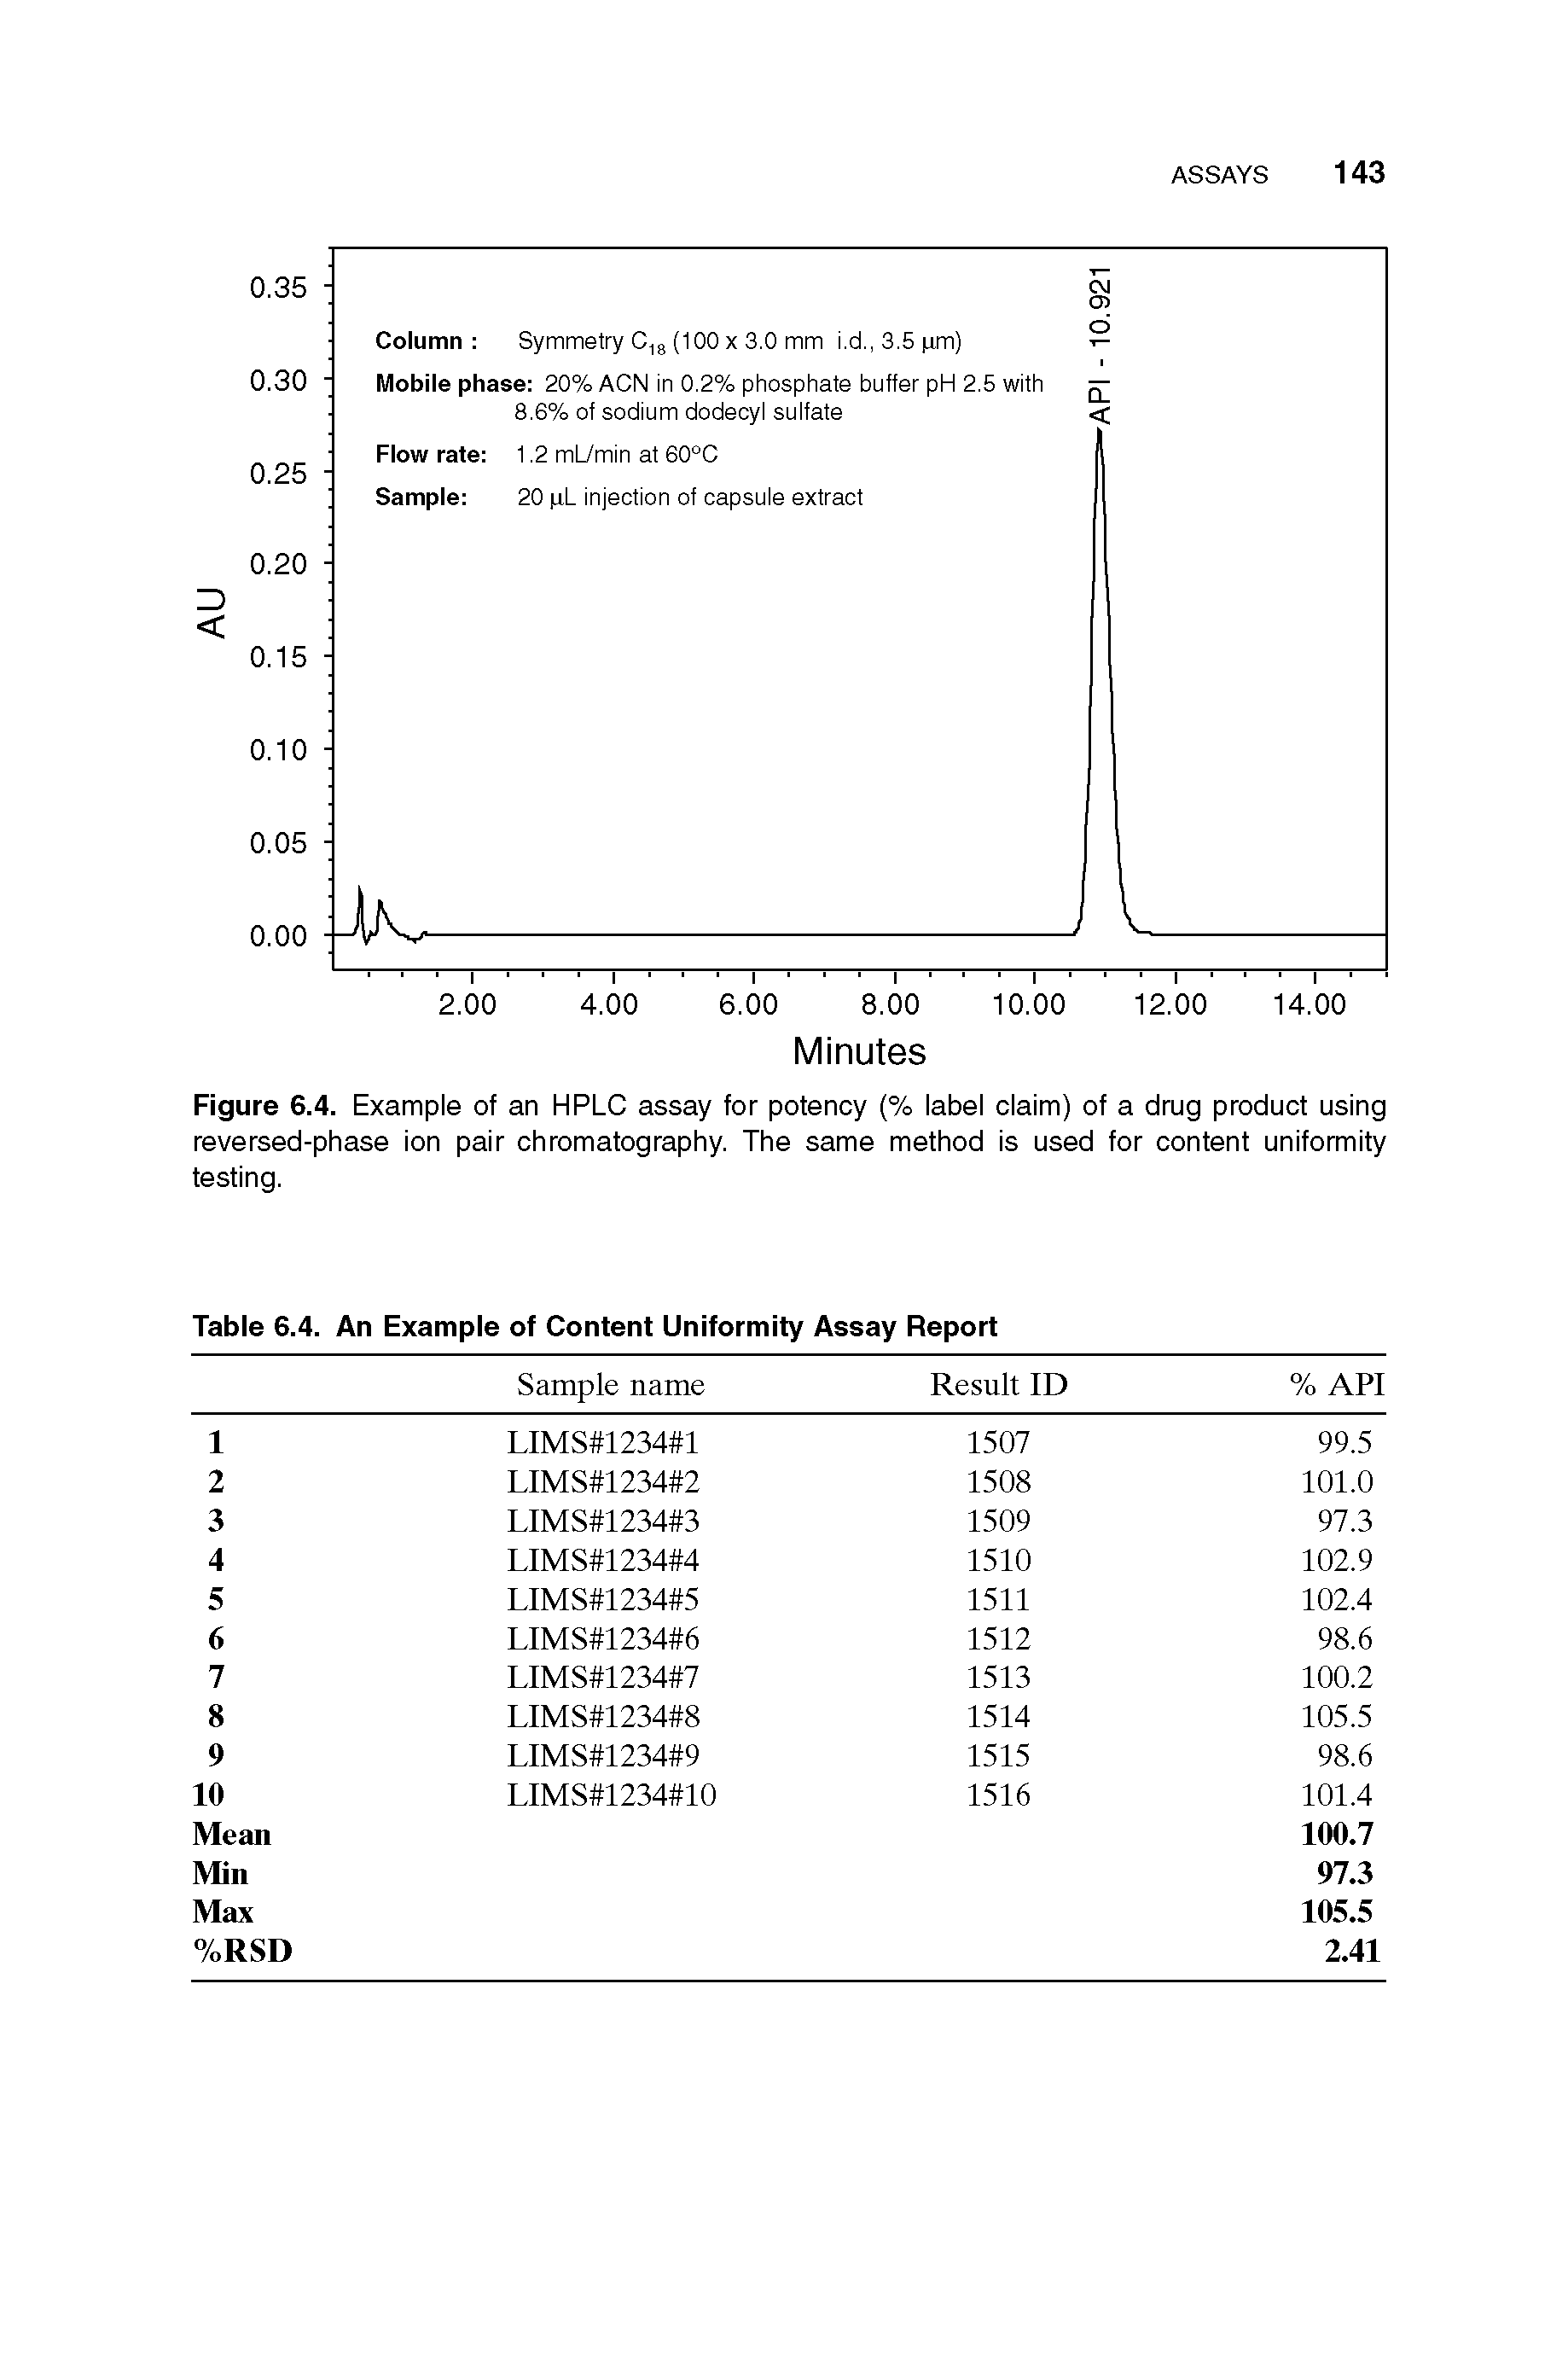 Figure 6.4. Example of an HPLC assay for potency (% label claim) of a drug product using reversed-phase ion pair chromatography. The same method is used for content uniformity testing.